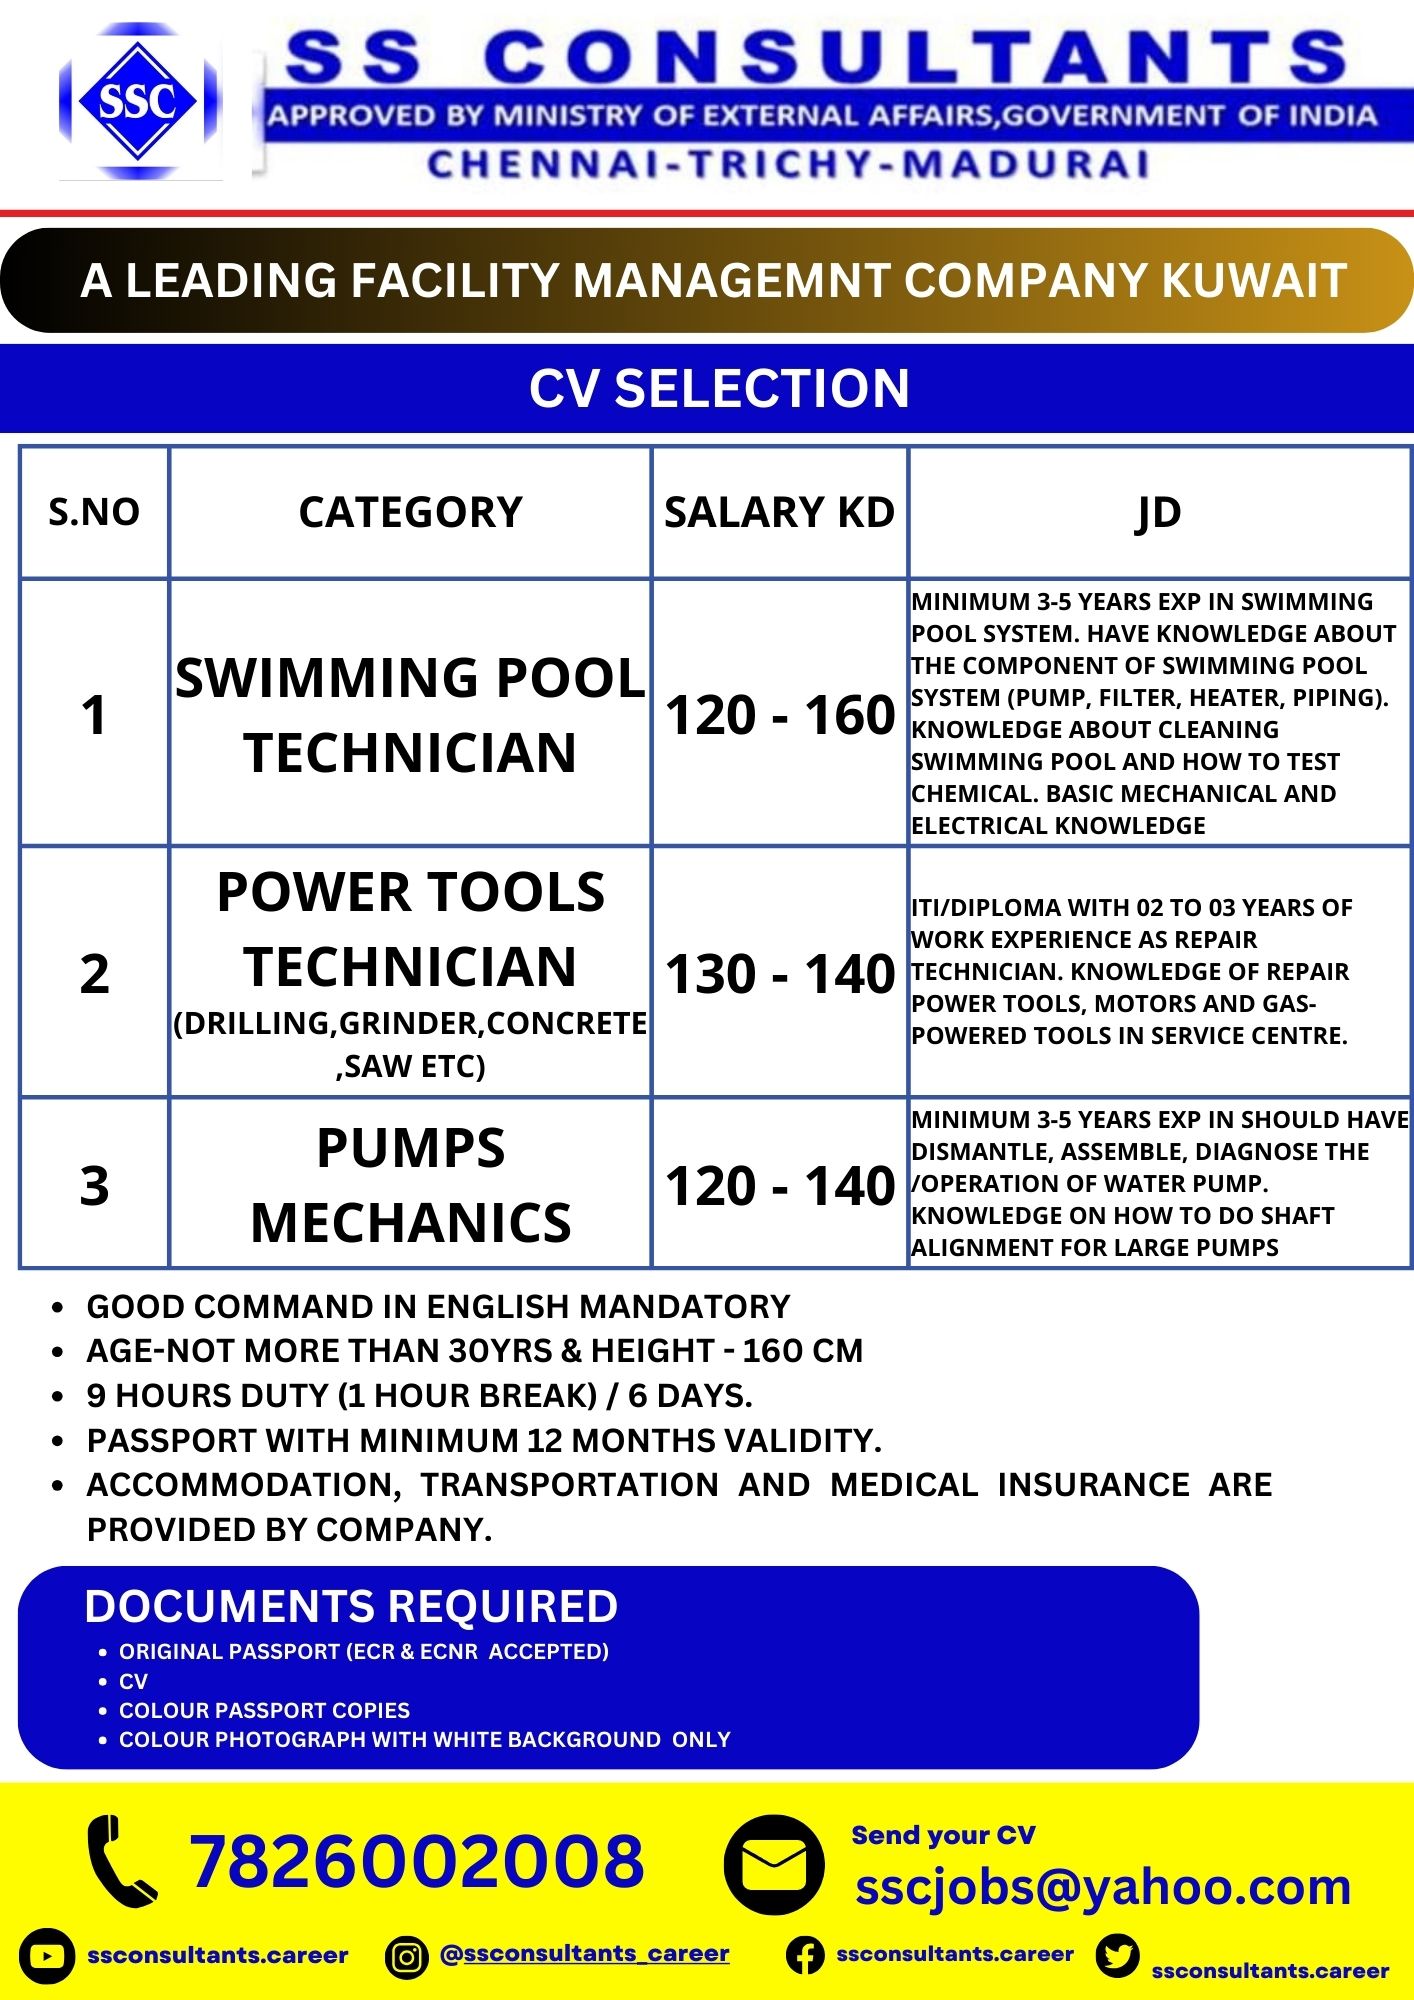 cv selection requirements 25